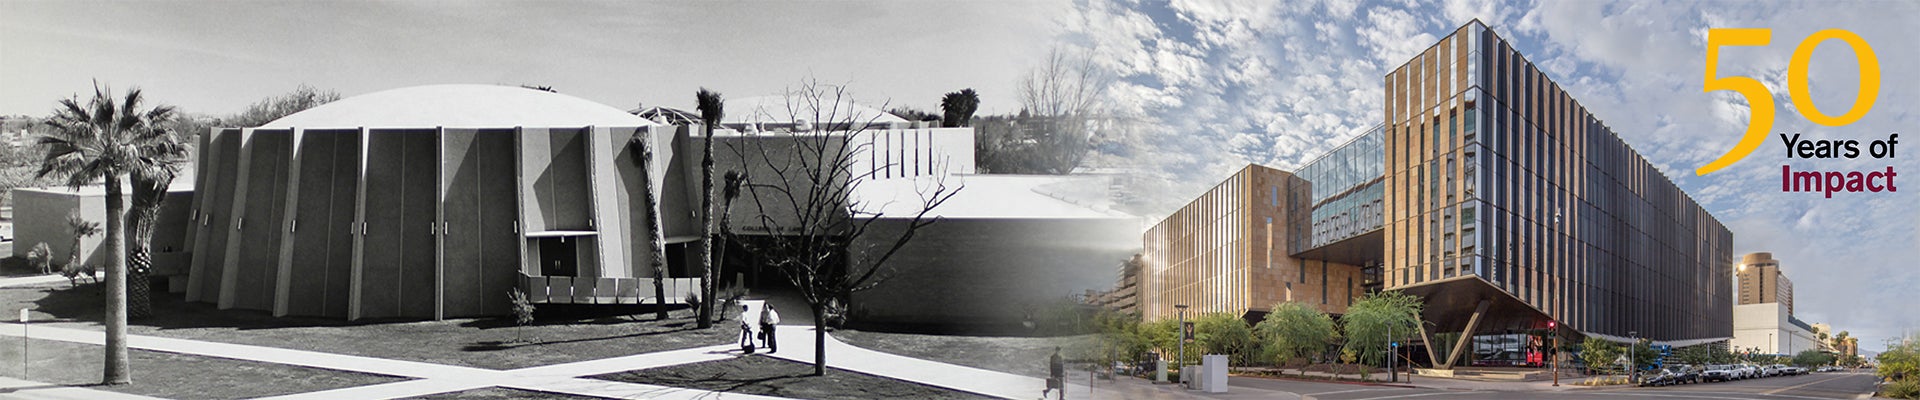 50 years of impact - Time shot of Old Armstrong hall in Tempe and the Beus Center for Law and Society in Downtown Phoenix